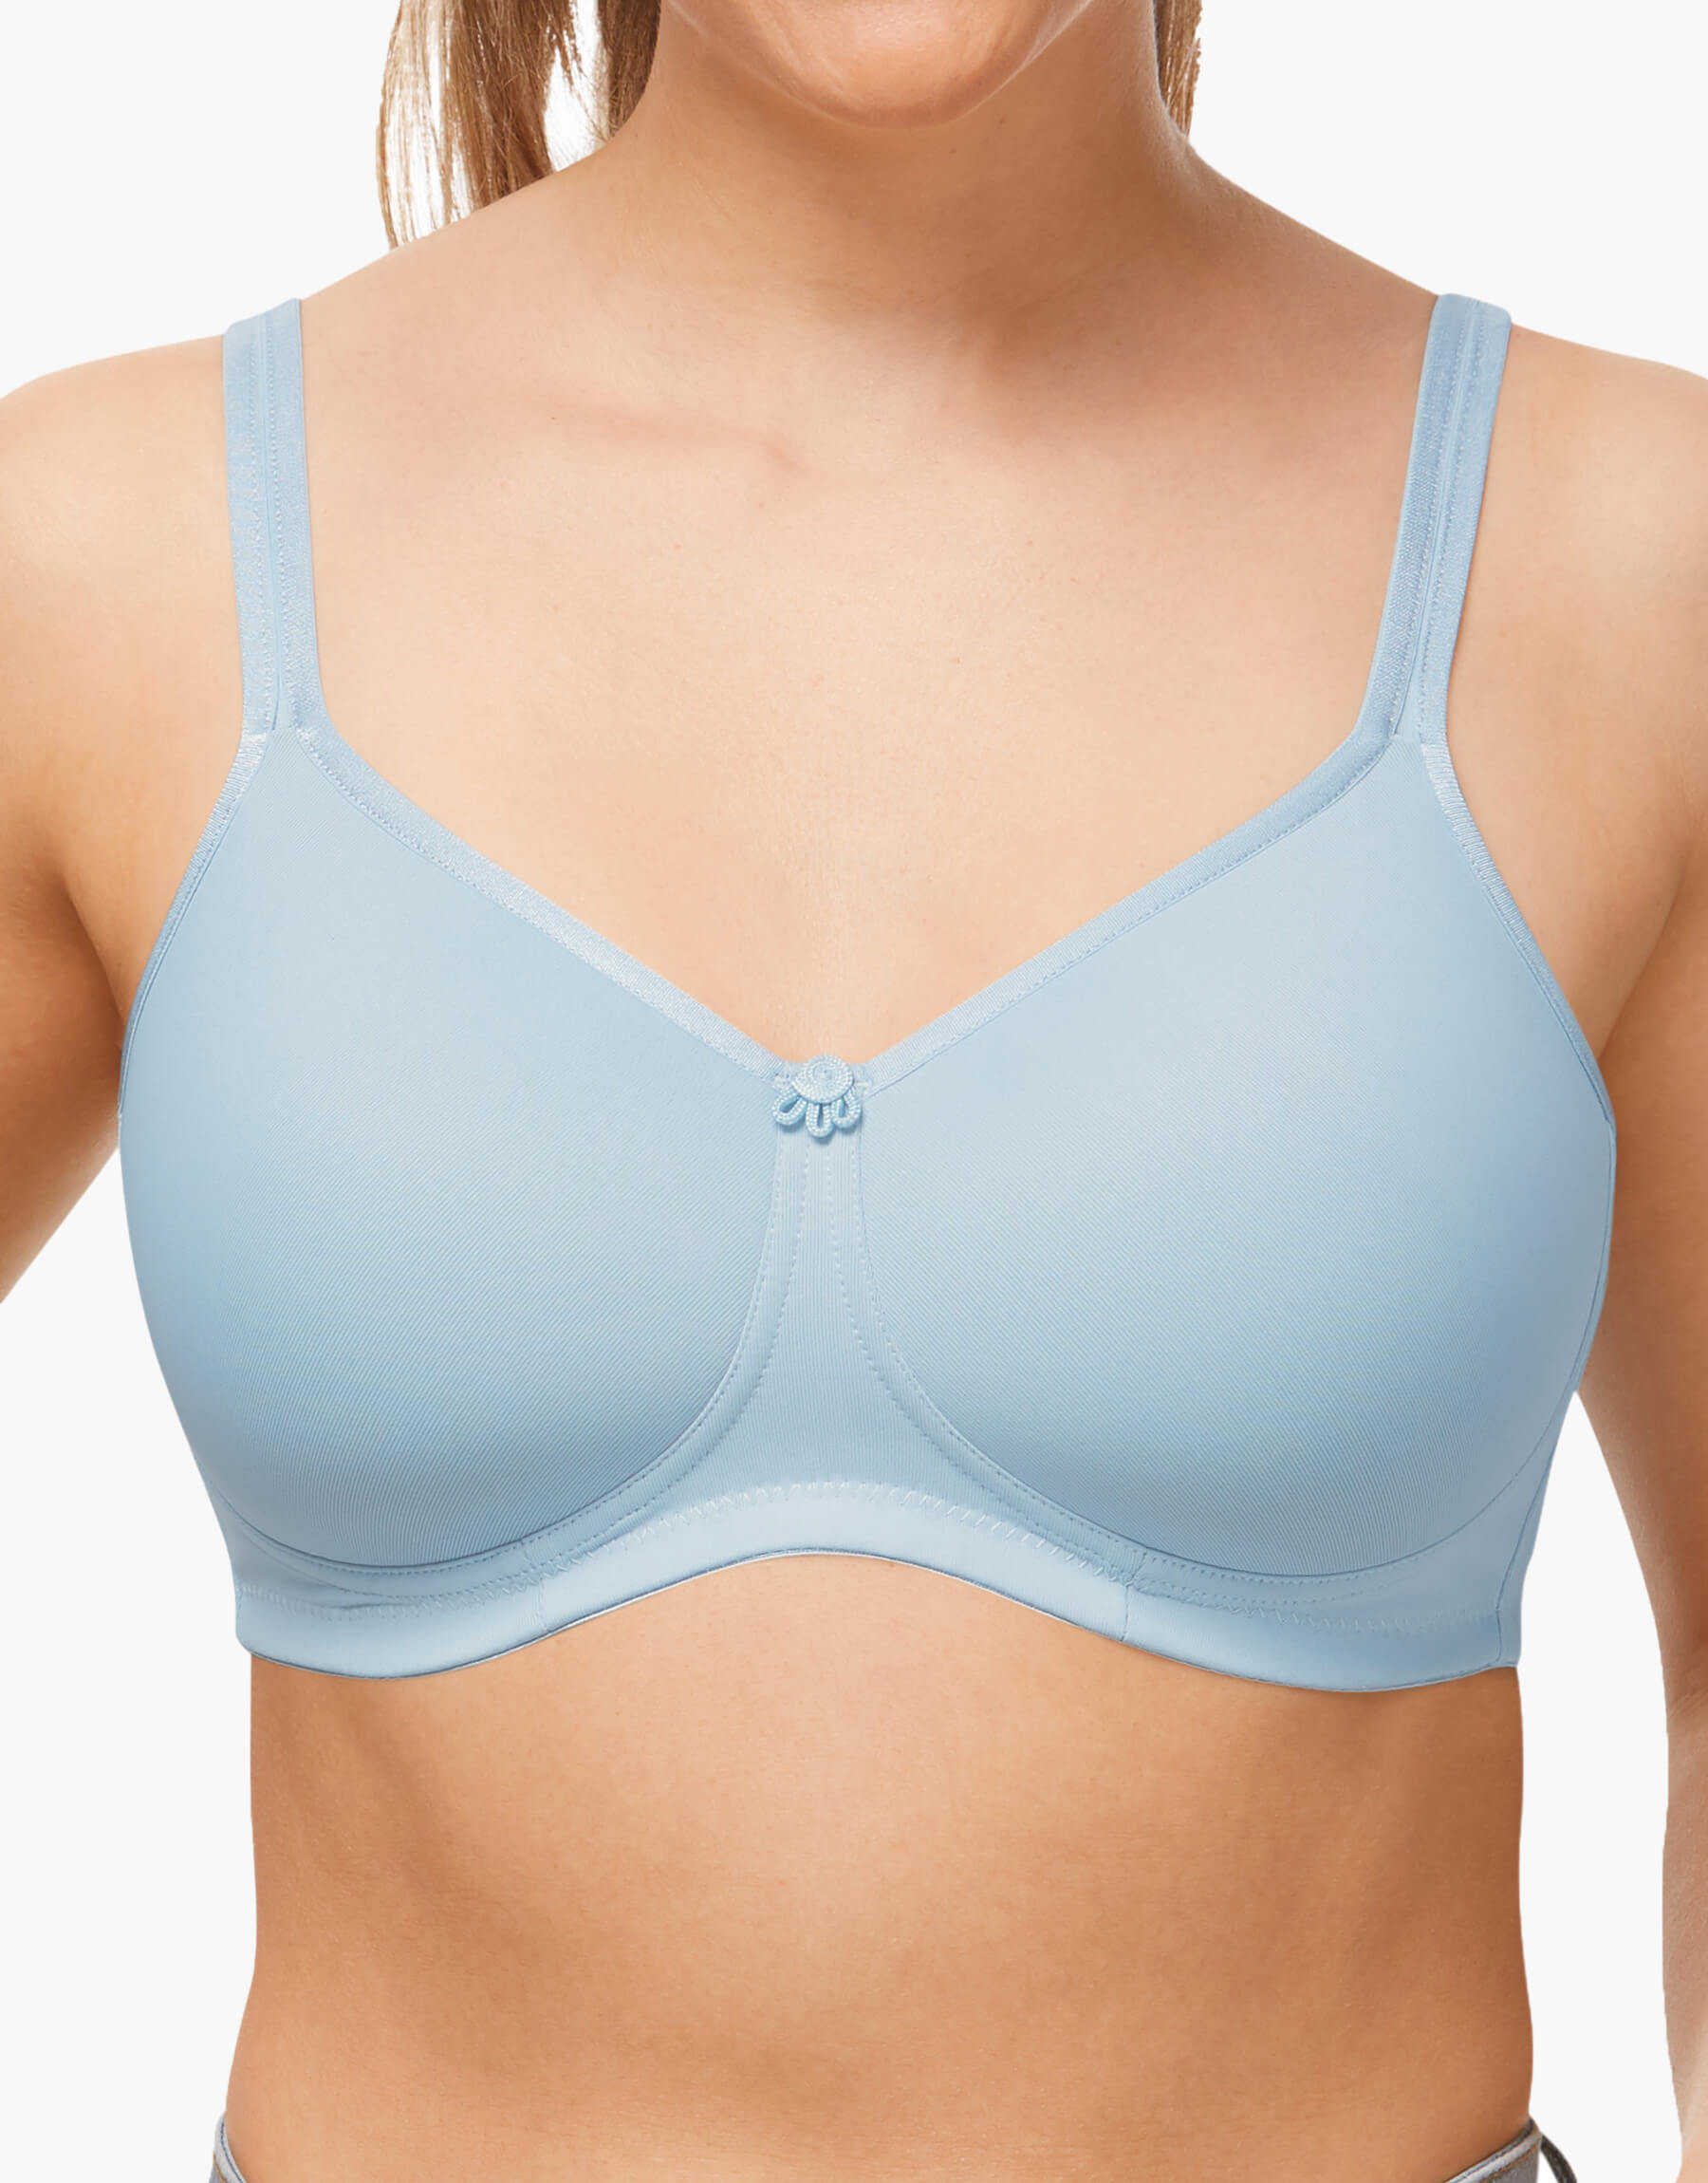 Discover the Life-Changing Benefits of Amoena Mastectomy Bras